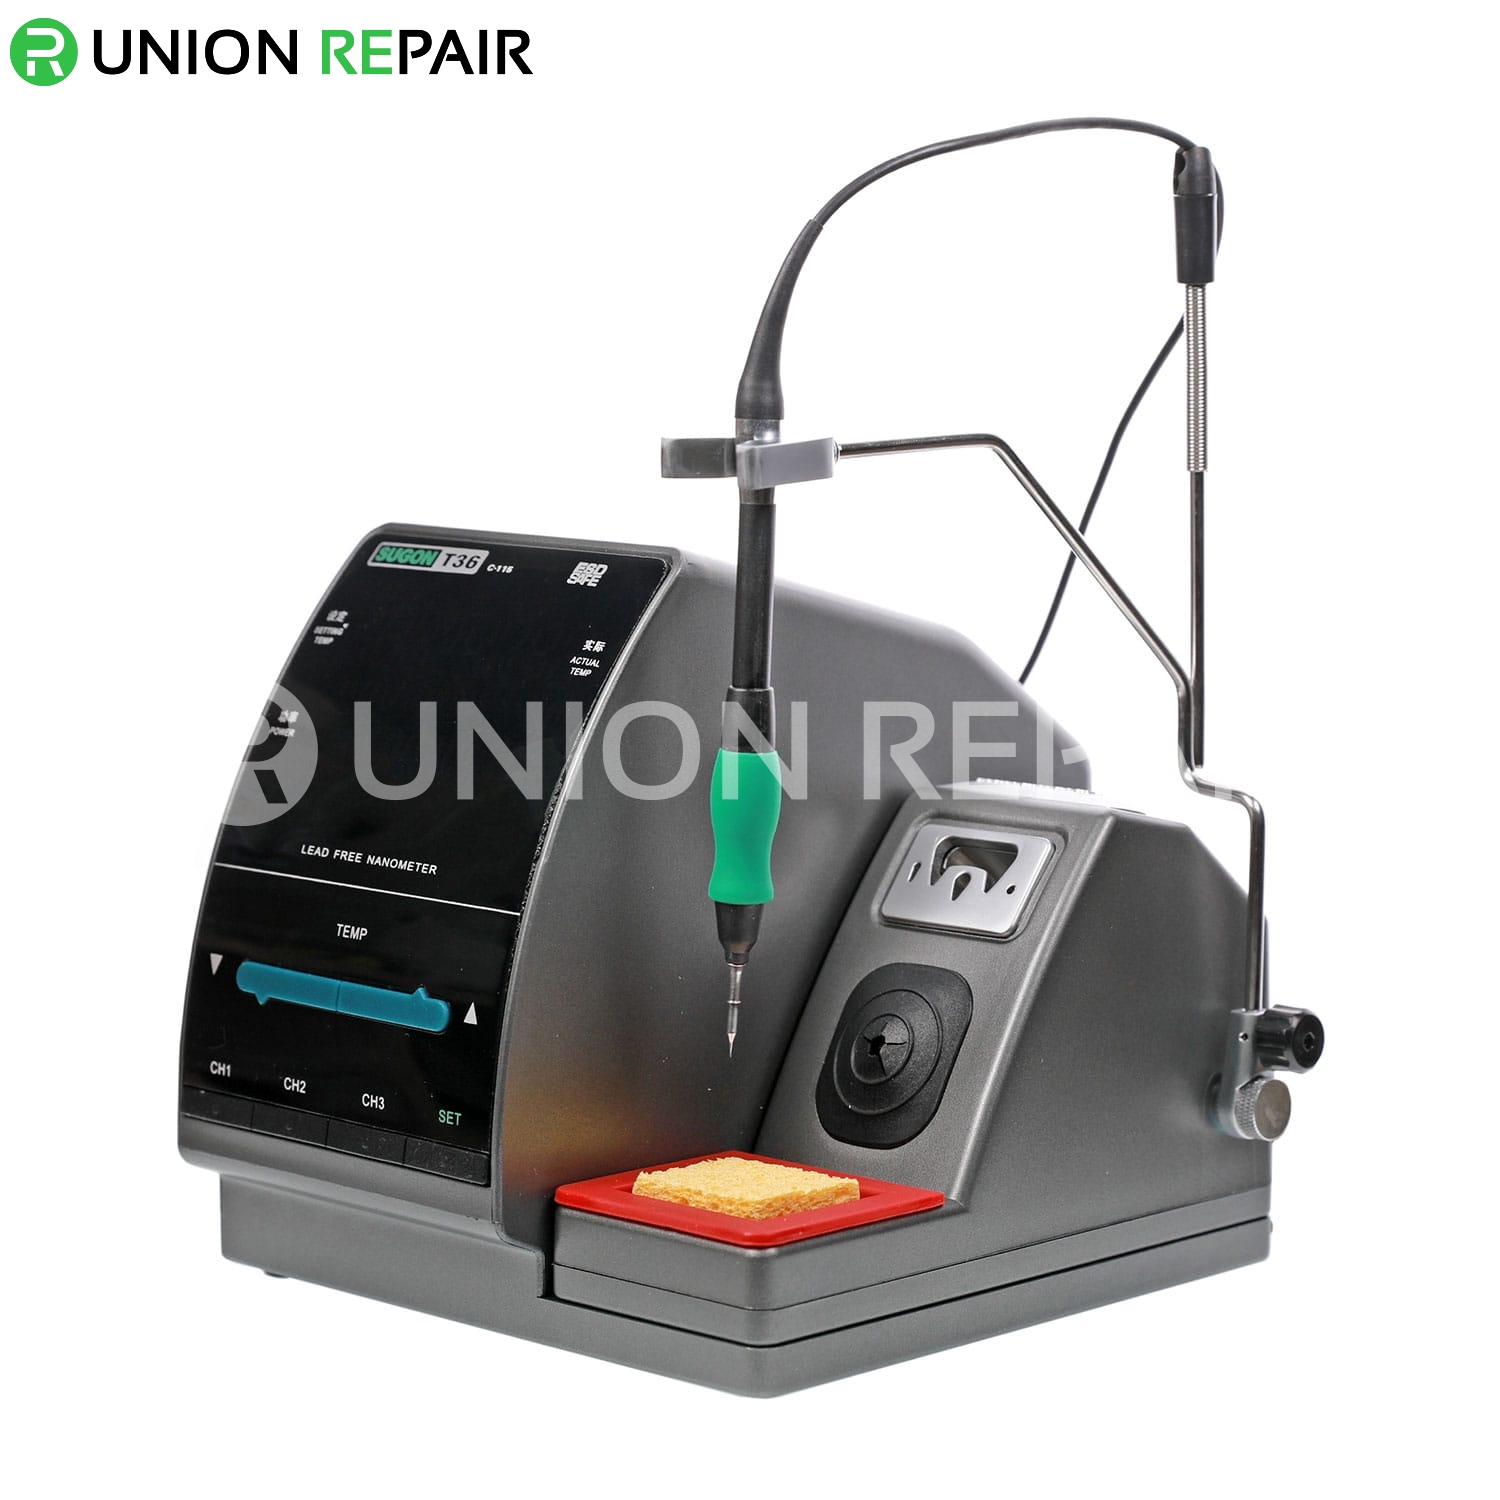 SUGON T36 SMD Soldering Station